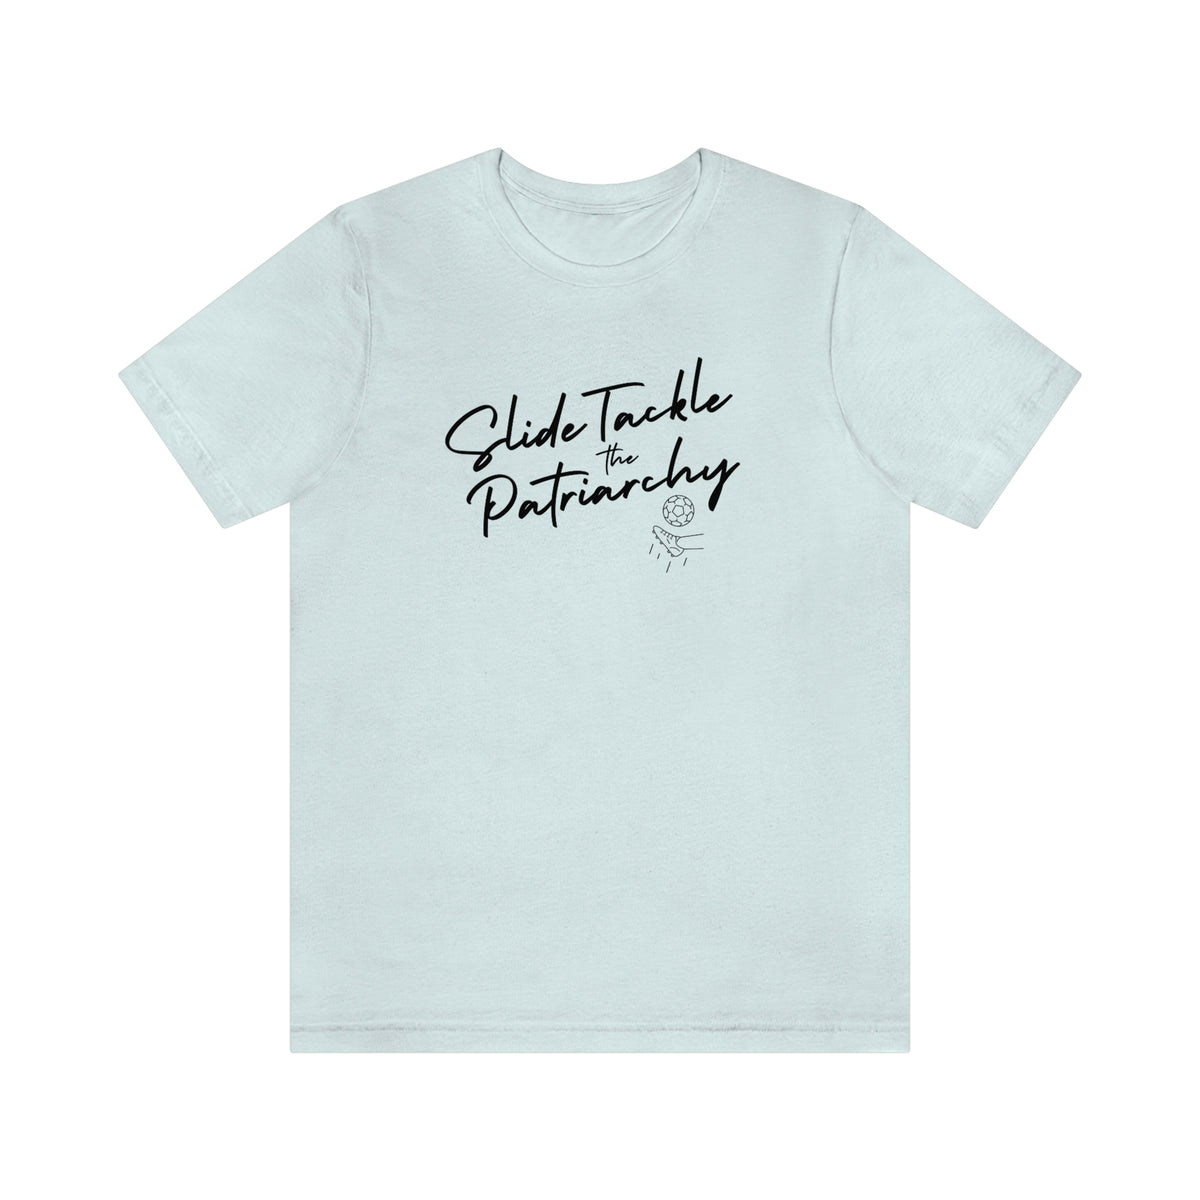 Slide Tackle The Patriarchy Adult T-Shirt